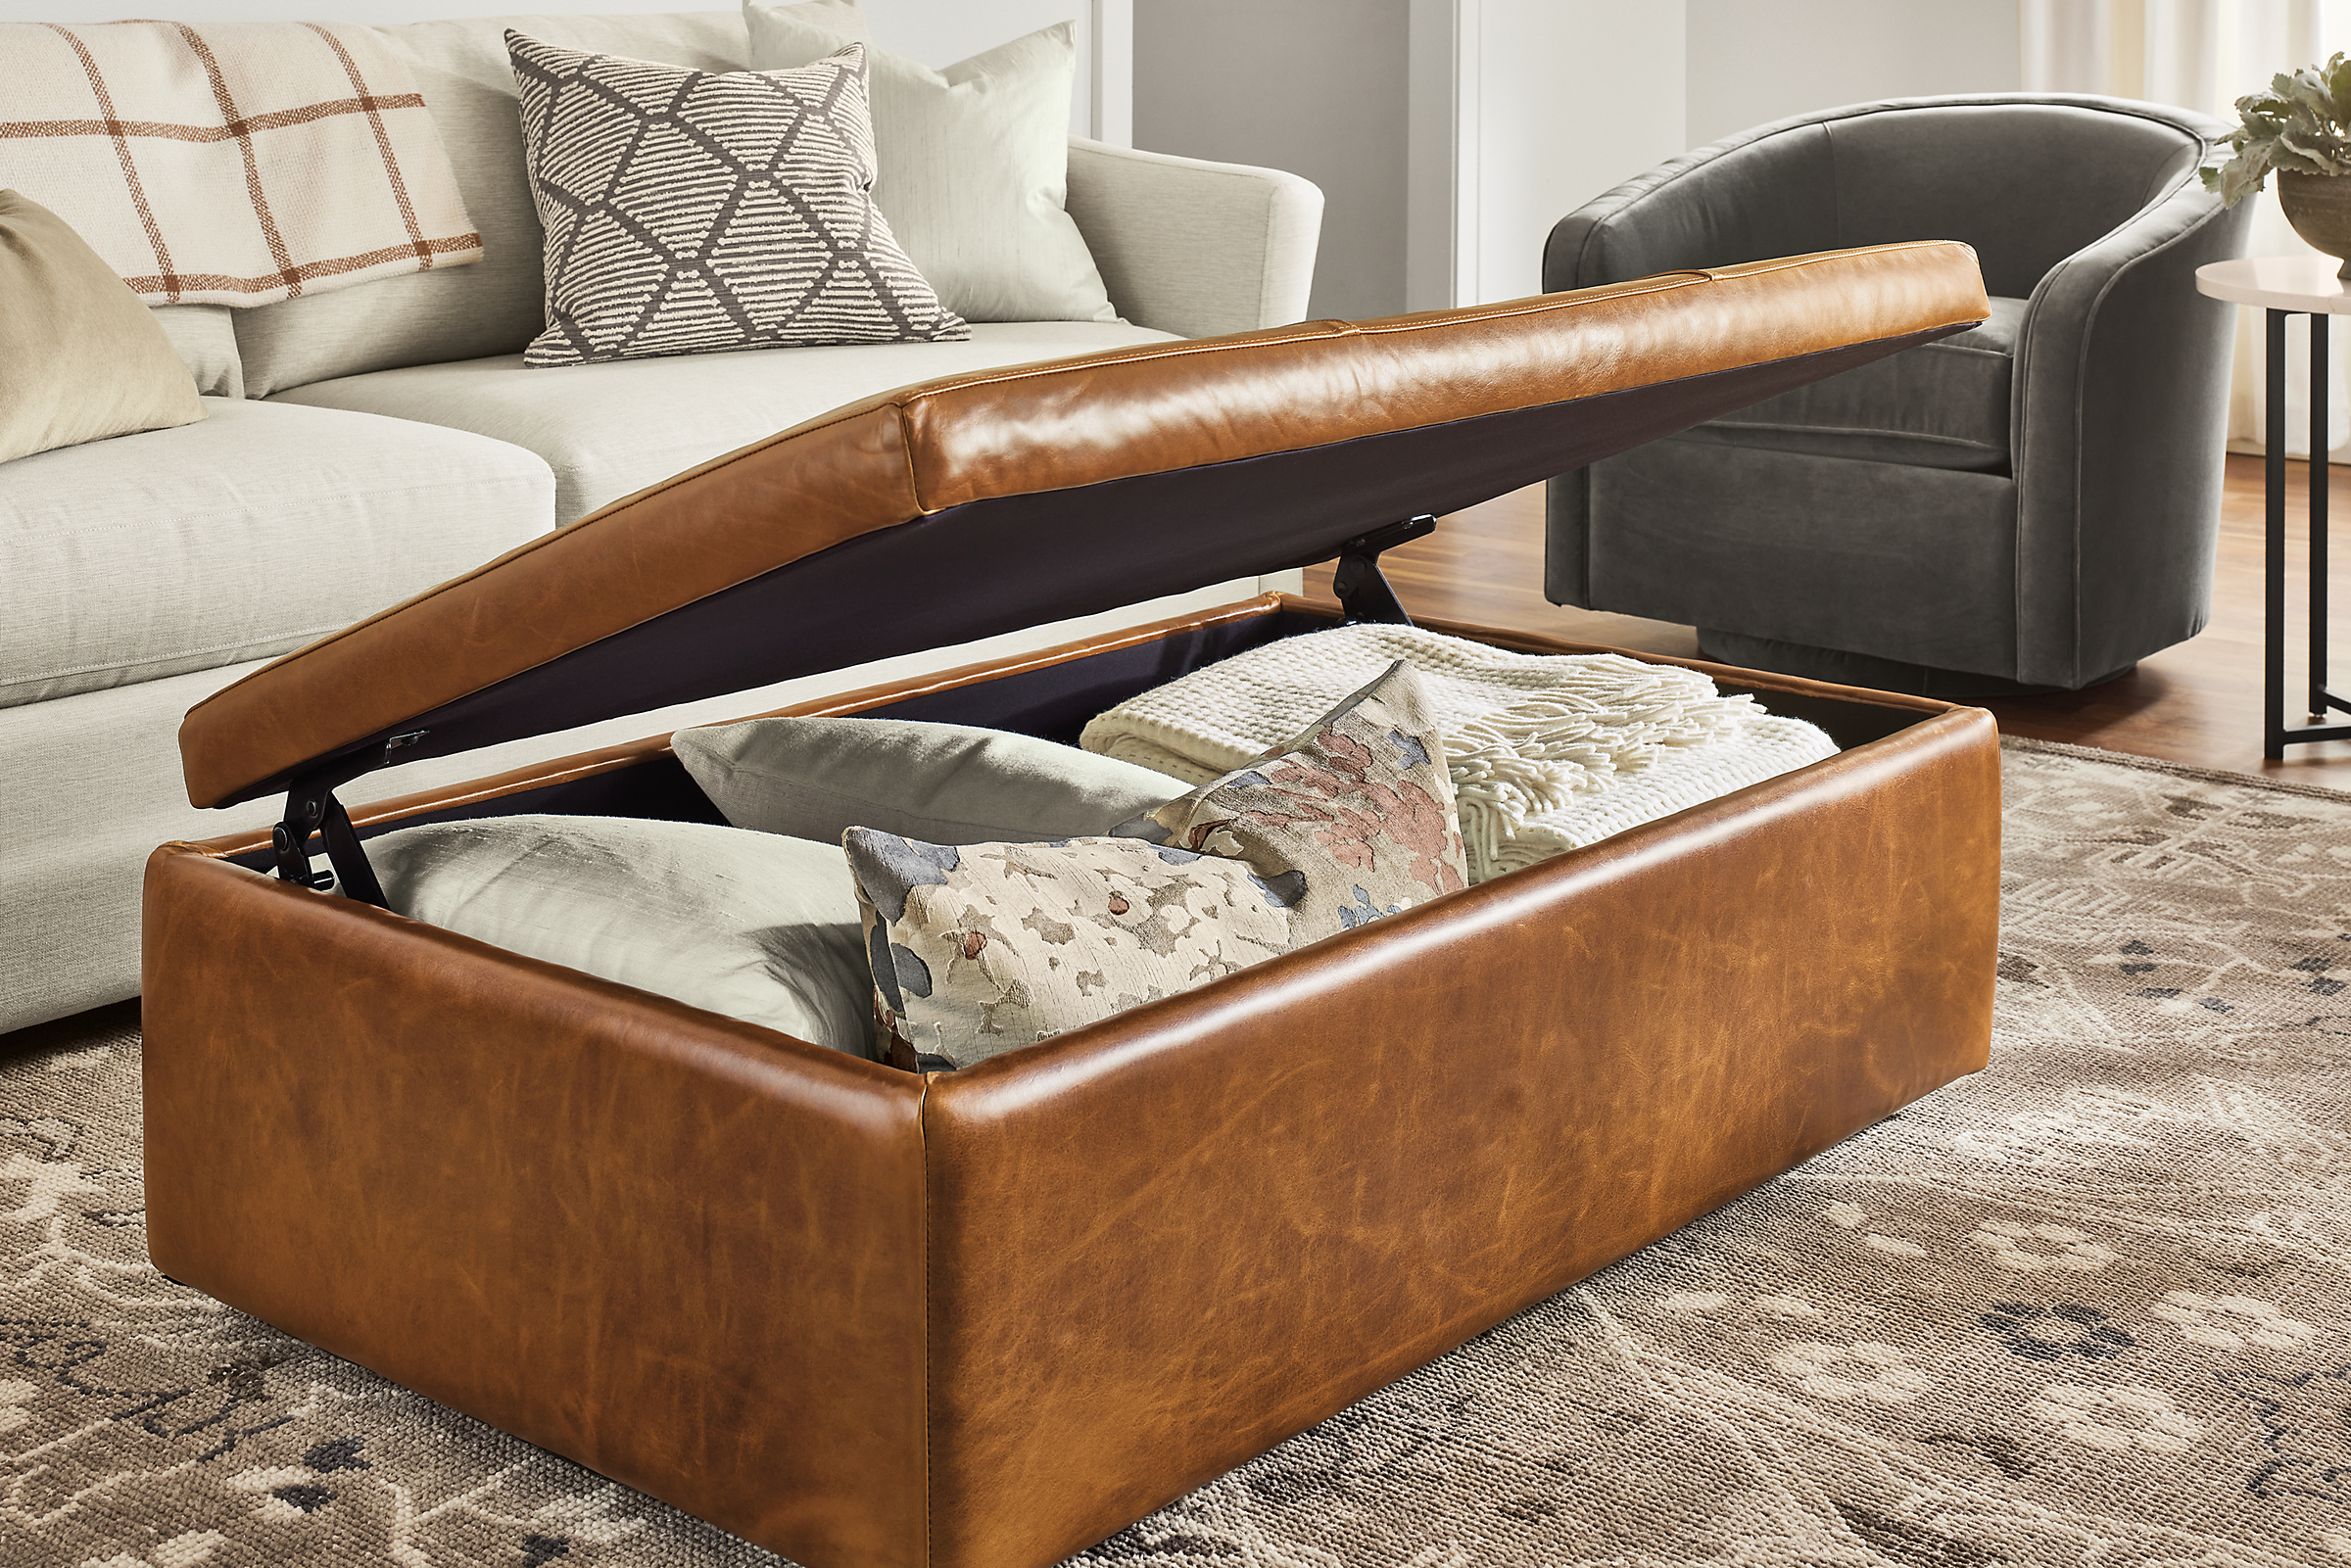 leather Lind storage ottoman with lid open showing throw pillows and blankets inside.